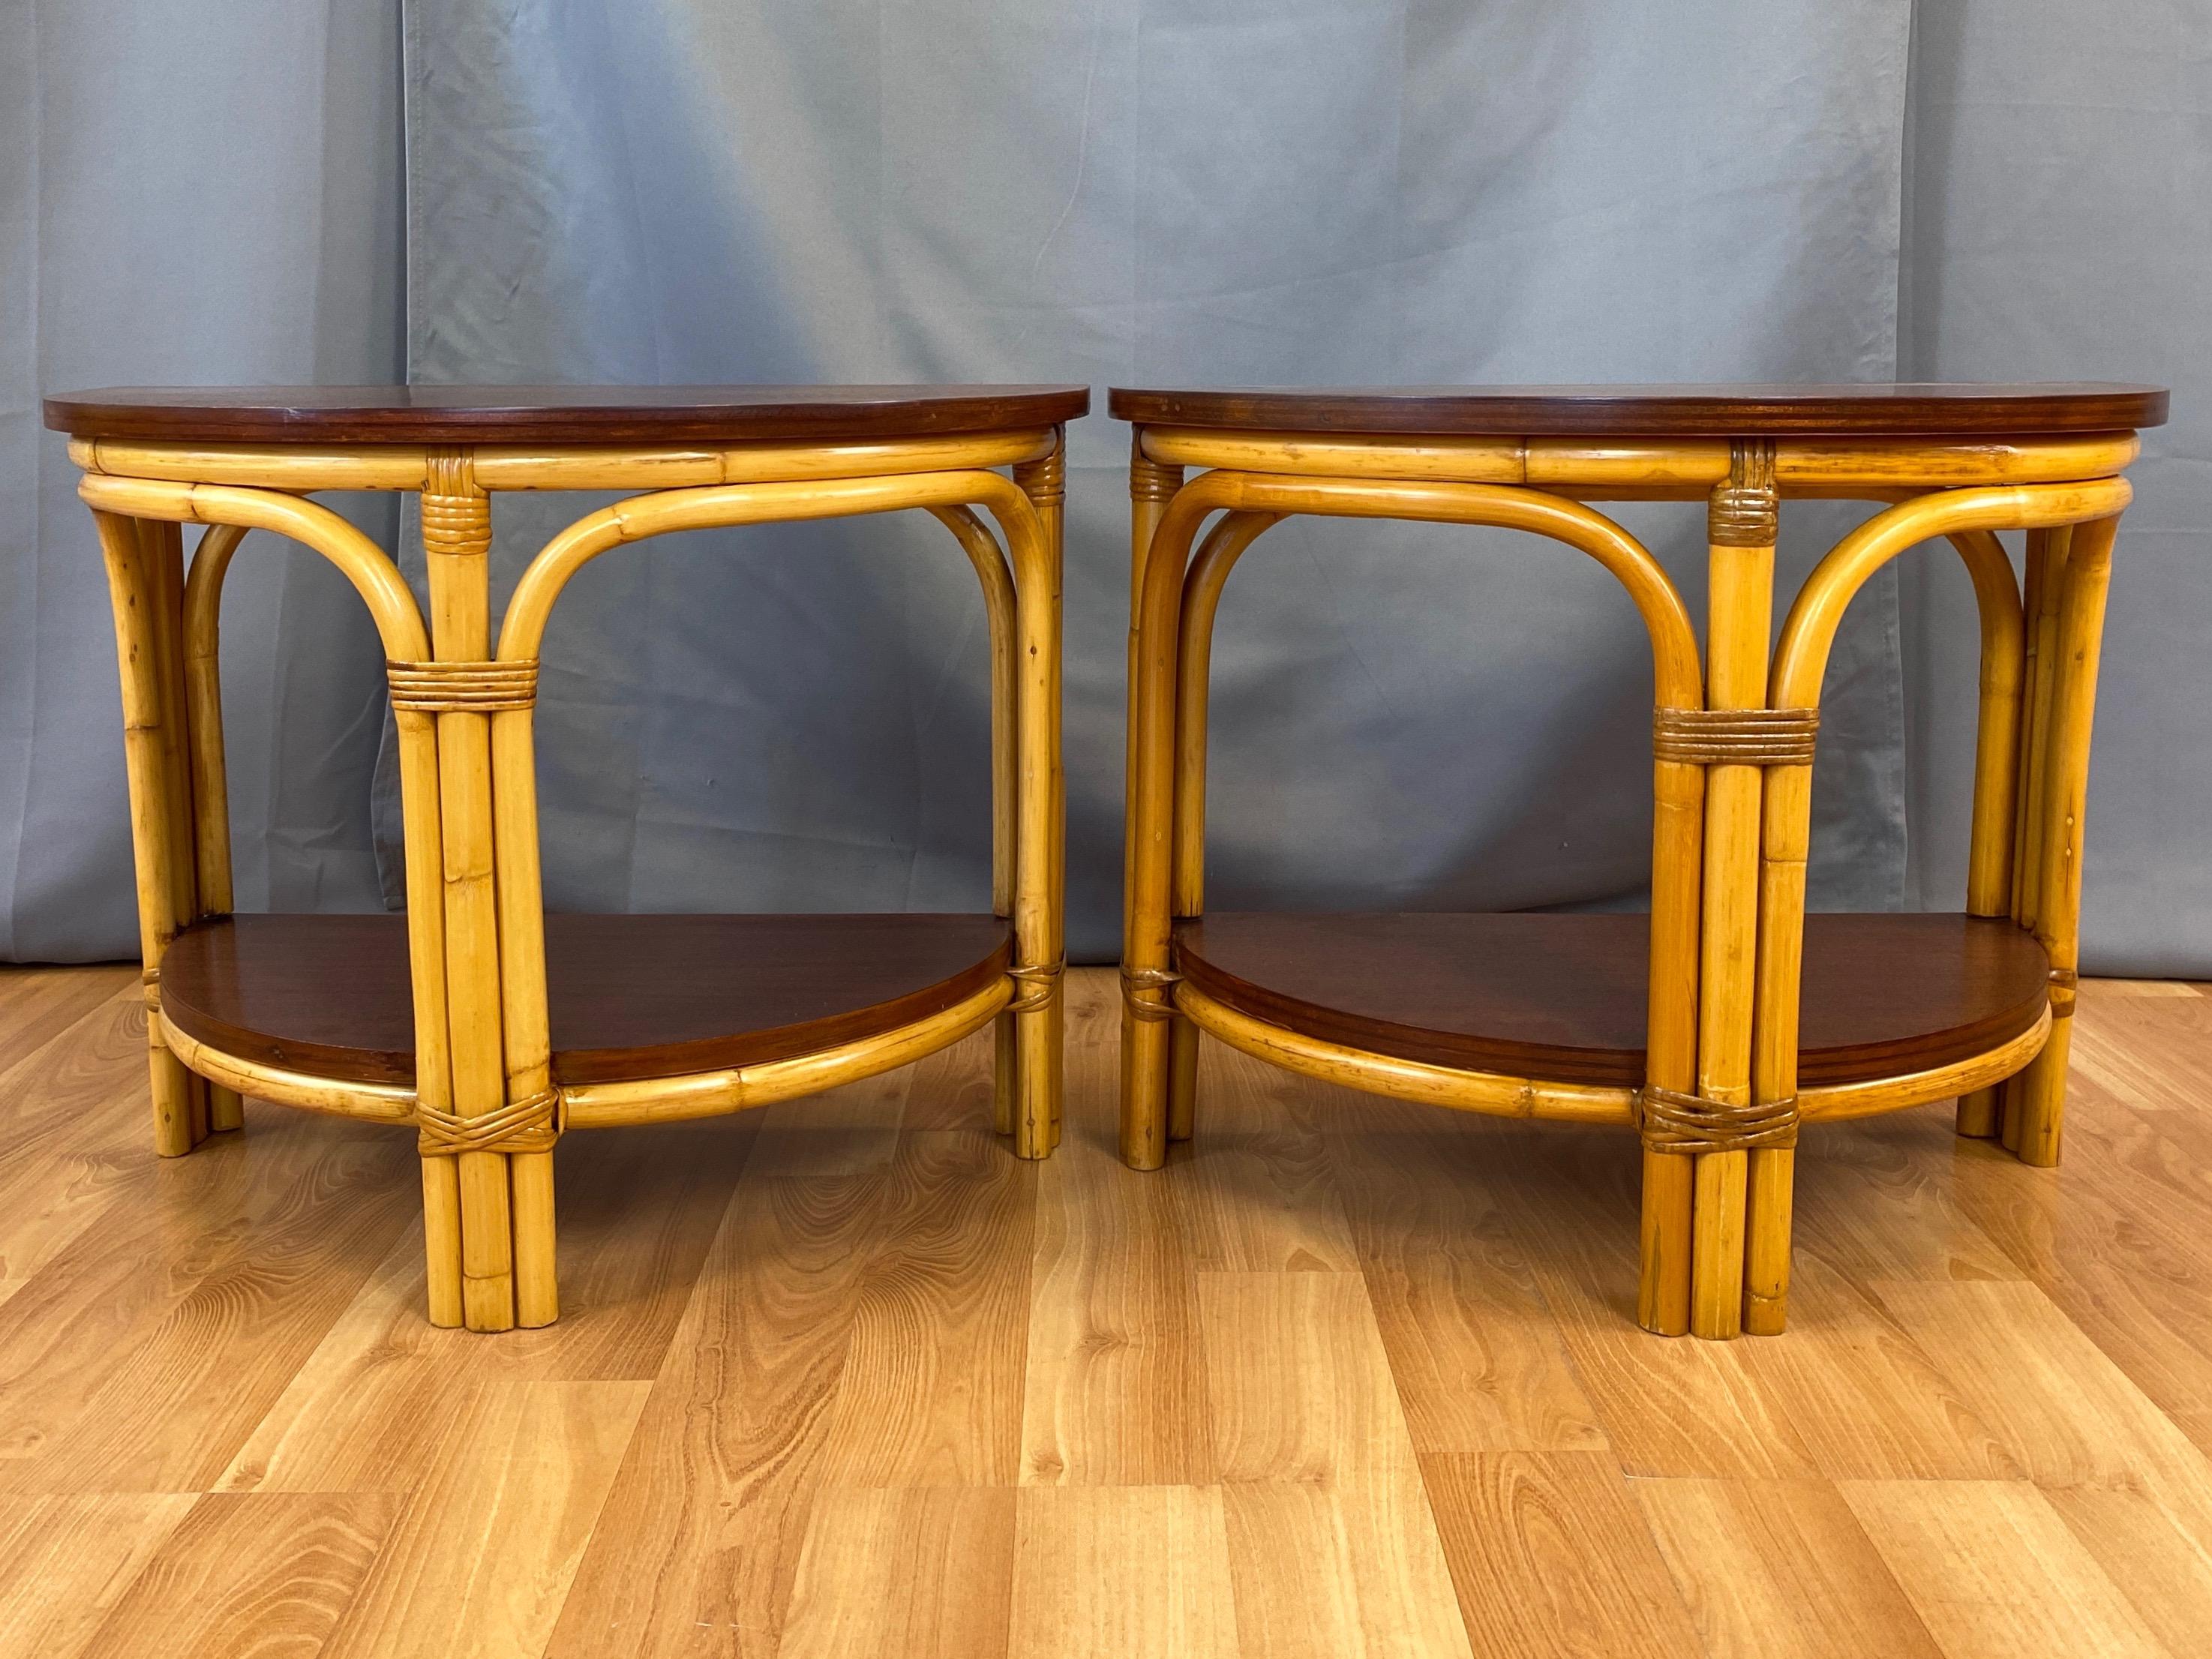 A pair of lovely mid-century rattan and mahogany two-level demilune side or end tables by Tropical Sun Co. of Pasadena, California.

Expertly-crafted bent rattan design features a trio of three-strand legs that elegantly branch off from and rejoin